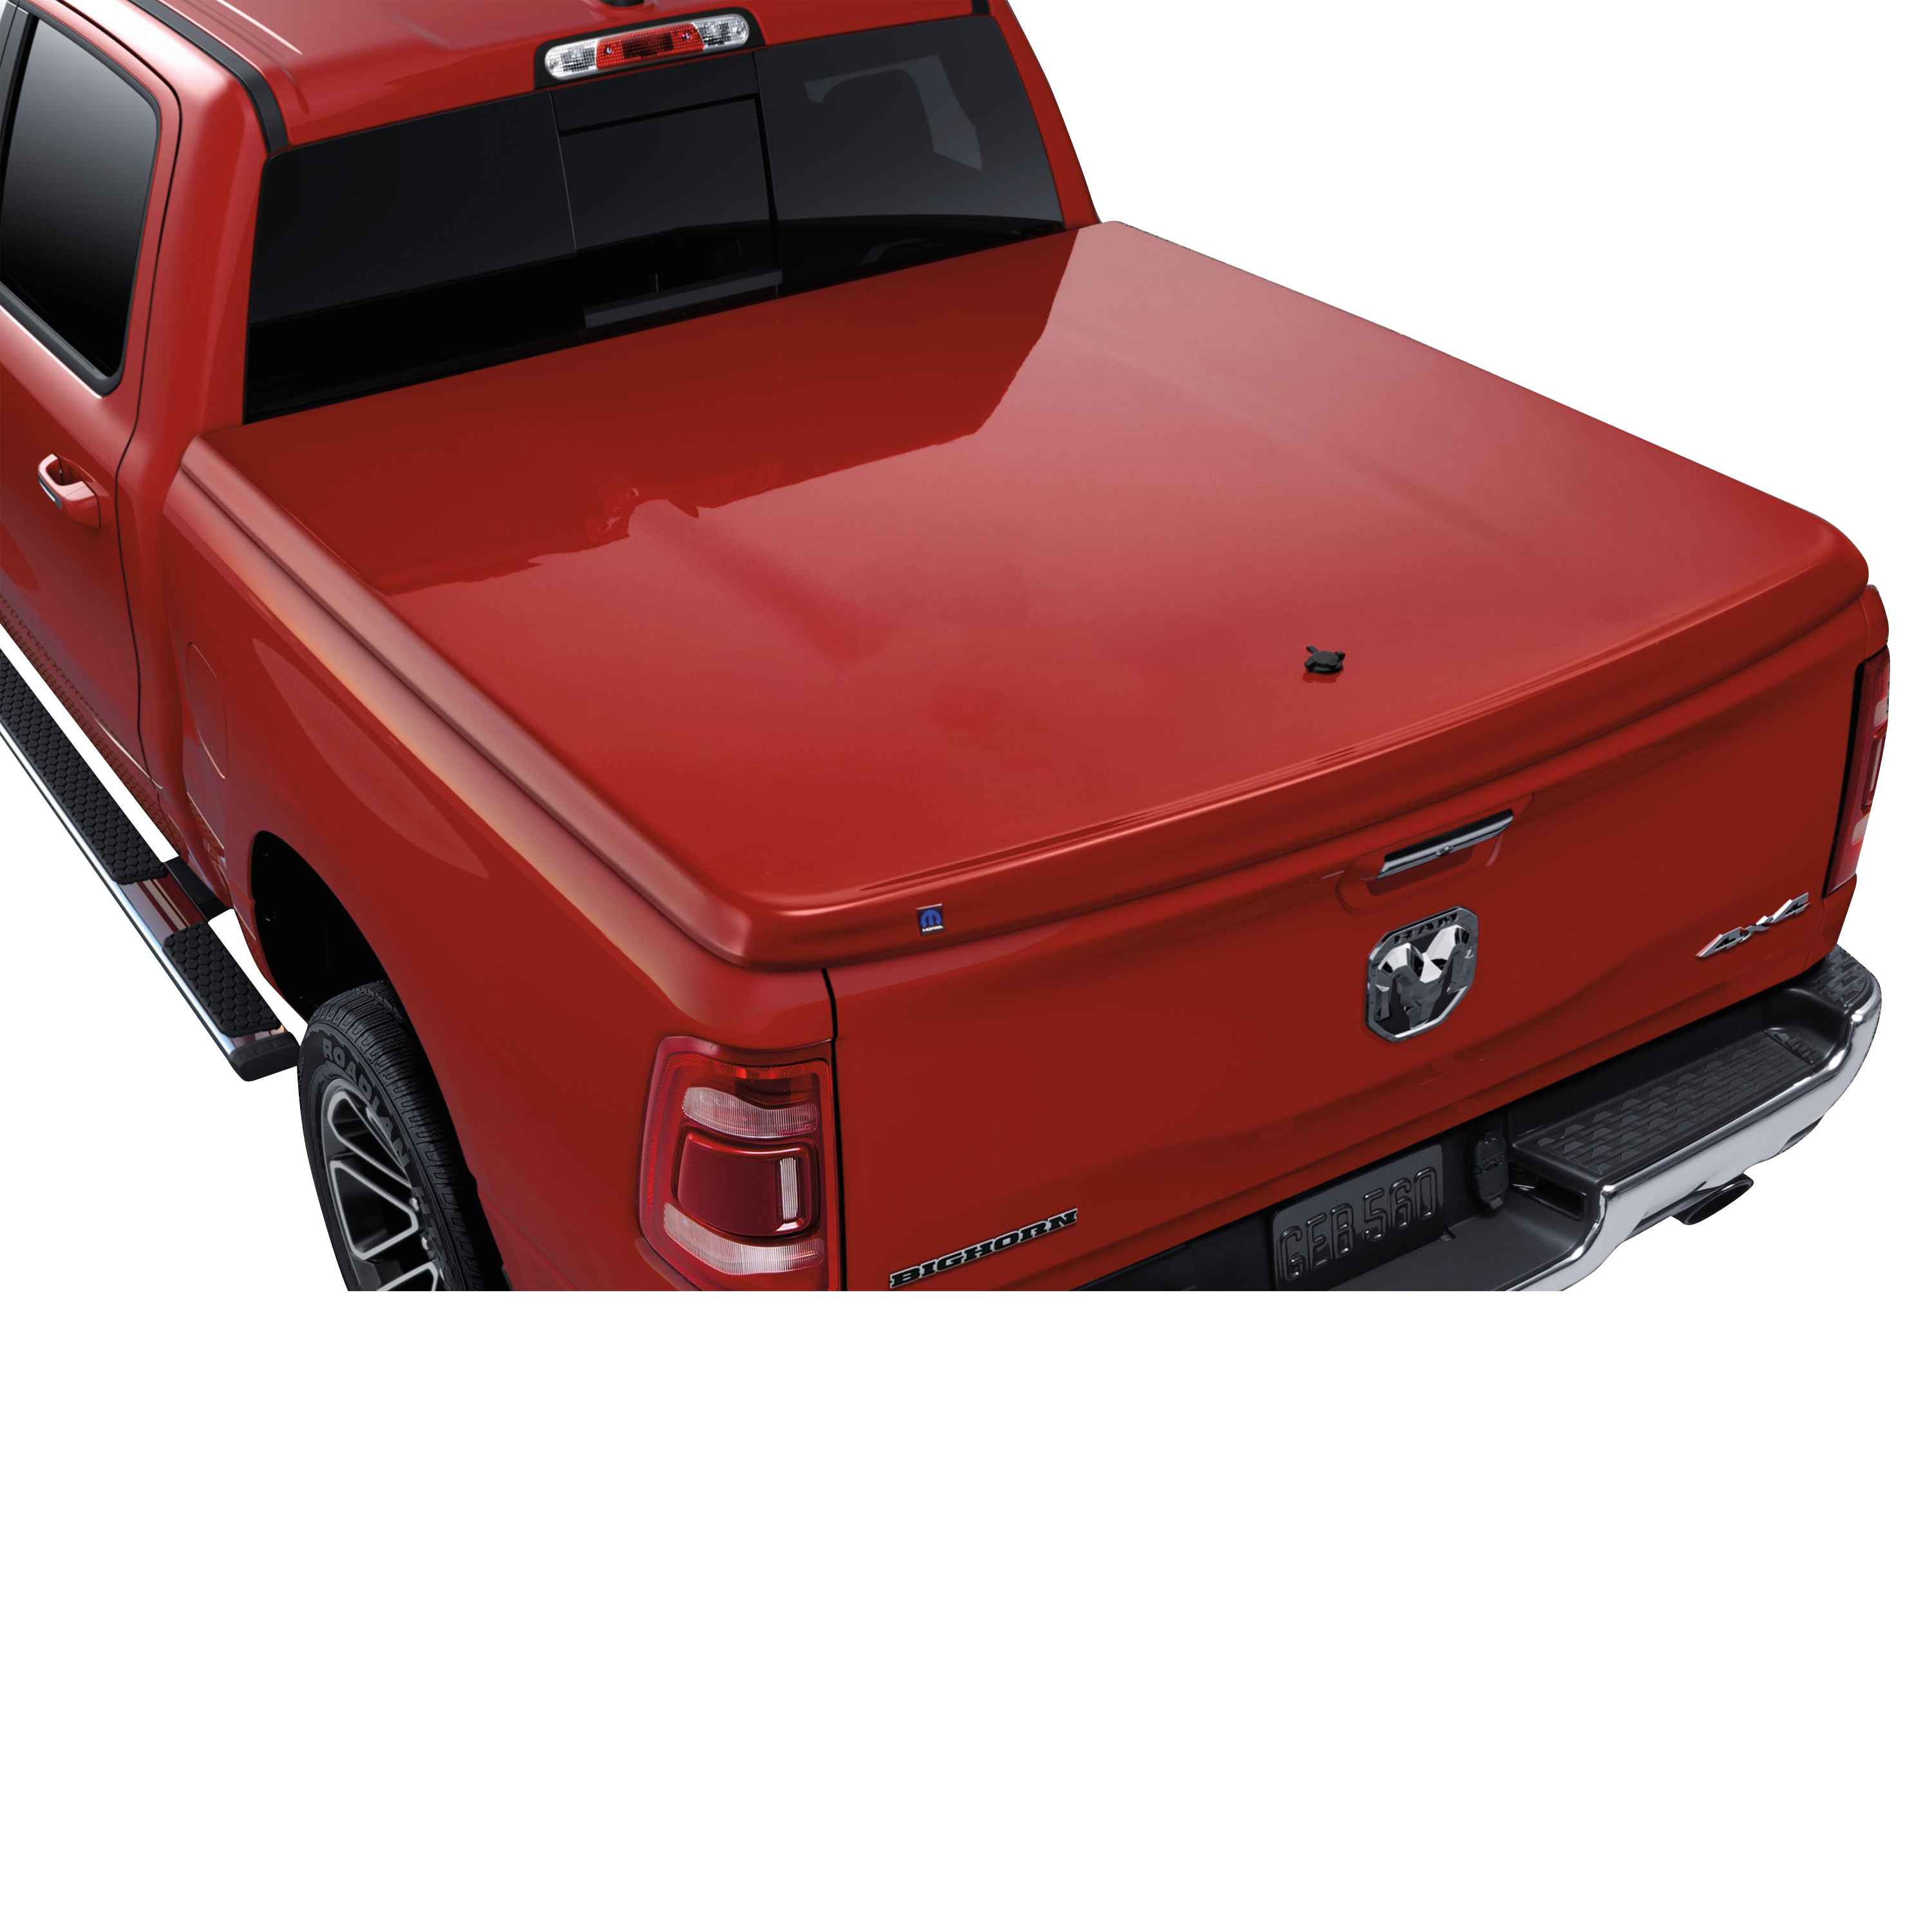 OEM 2020 Ram 1500 One-Piece Tonneau Cover in Body Color for 6' 4 Conventional Bed - Delmonico Red